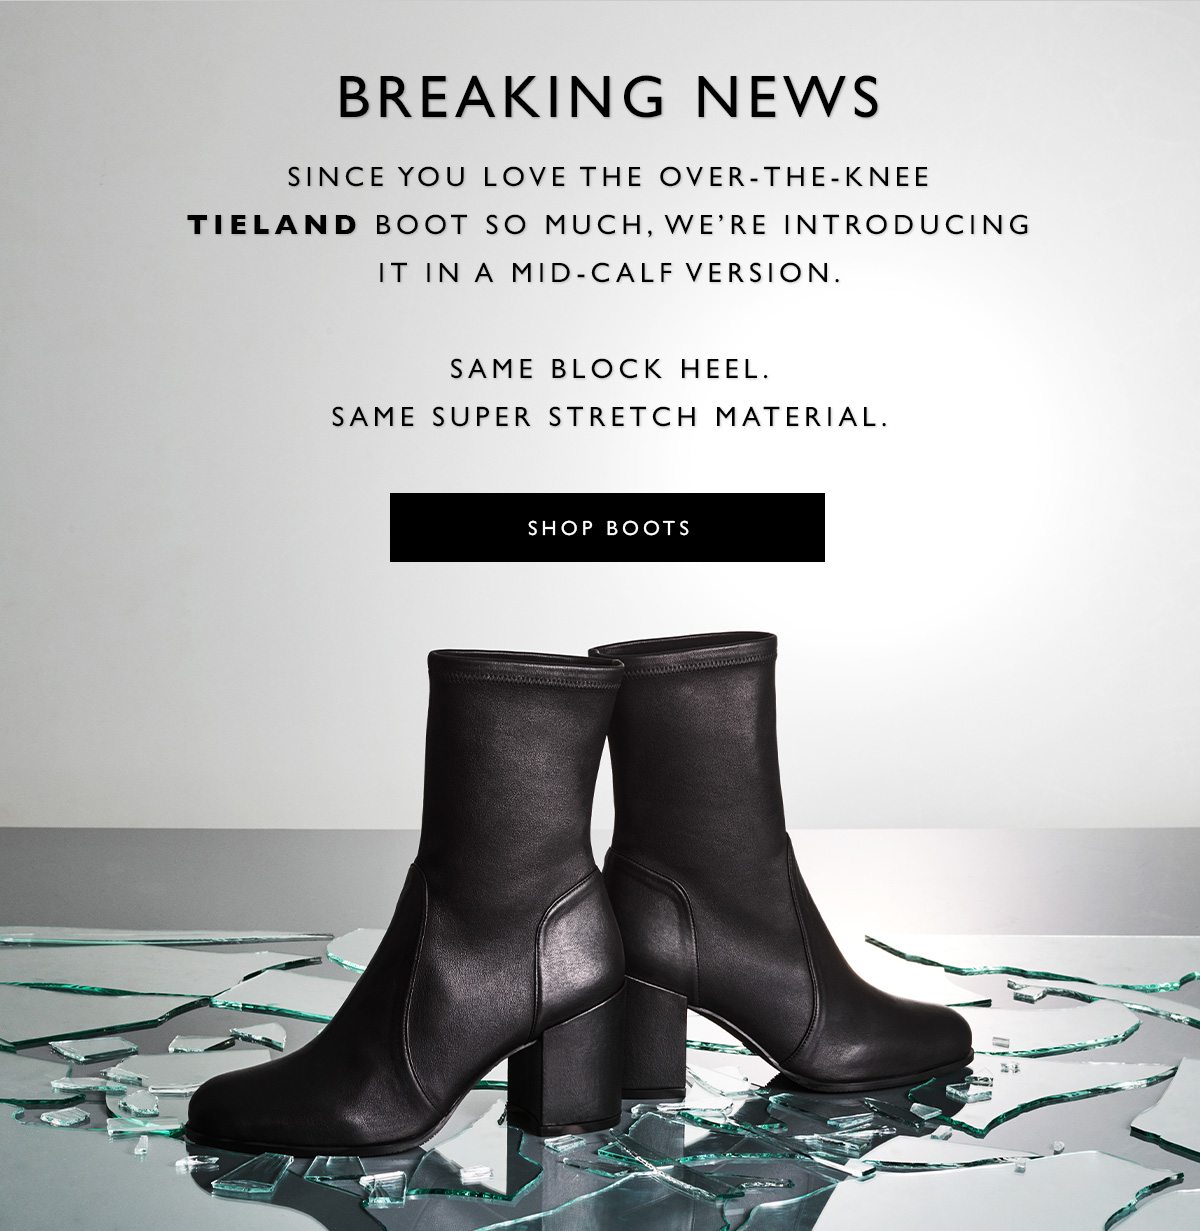 BREAKING NEWS. Since you love the over-the-knee TIELAND boot so much, we're introducing it in a mid-calf version. SHOP BOOTS.